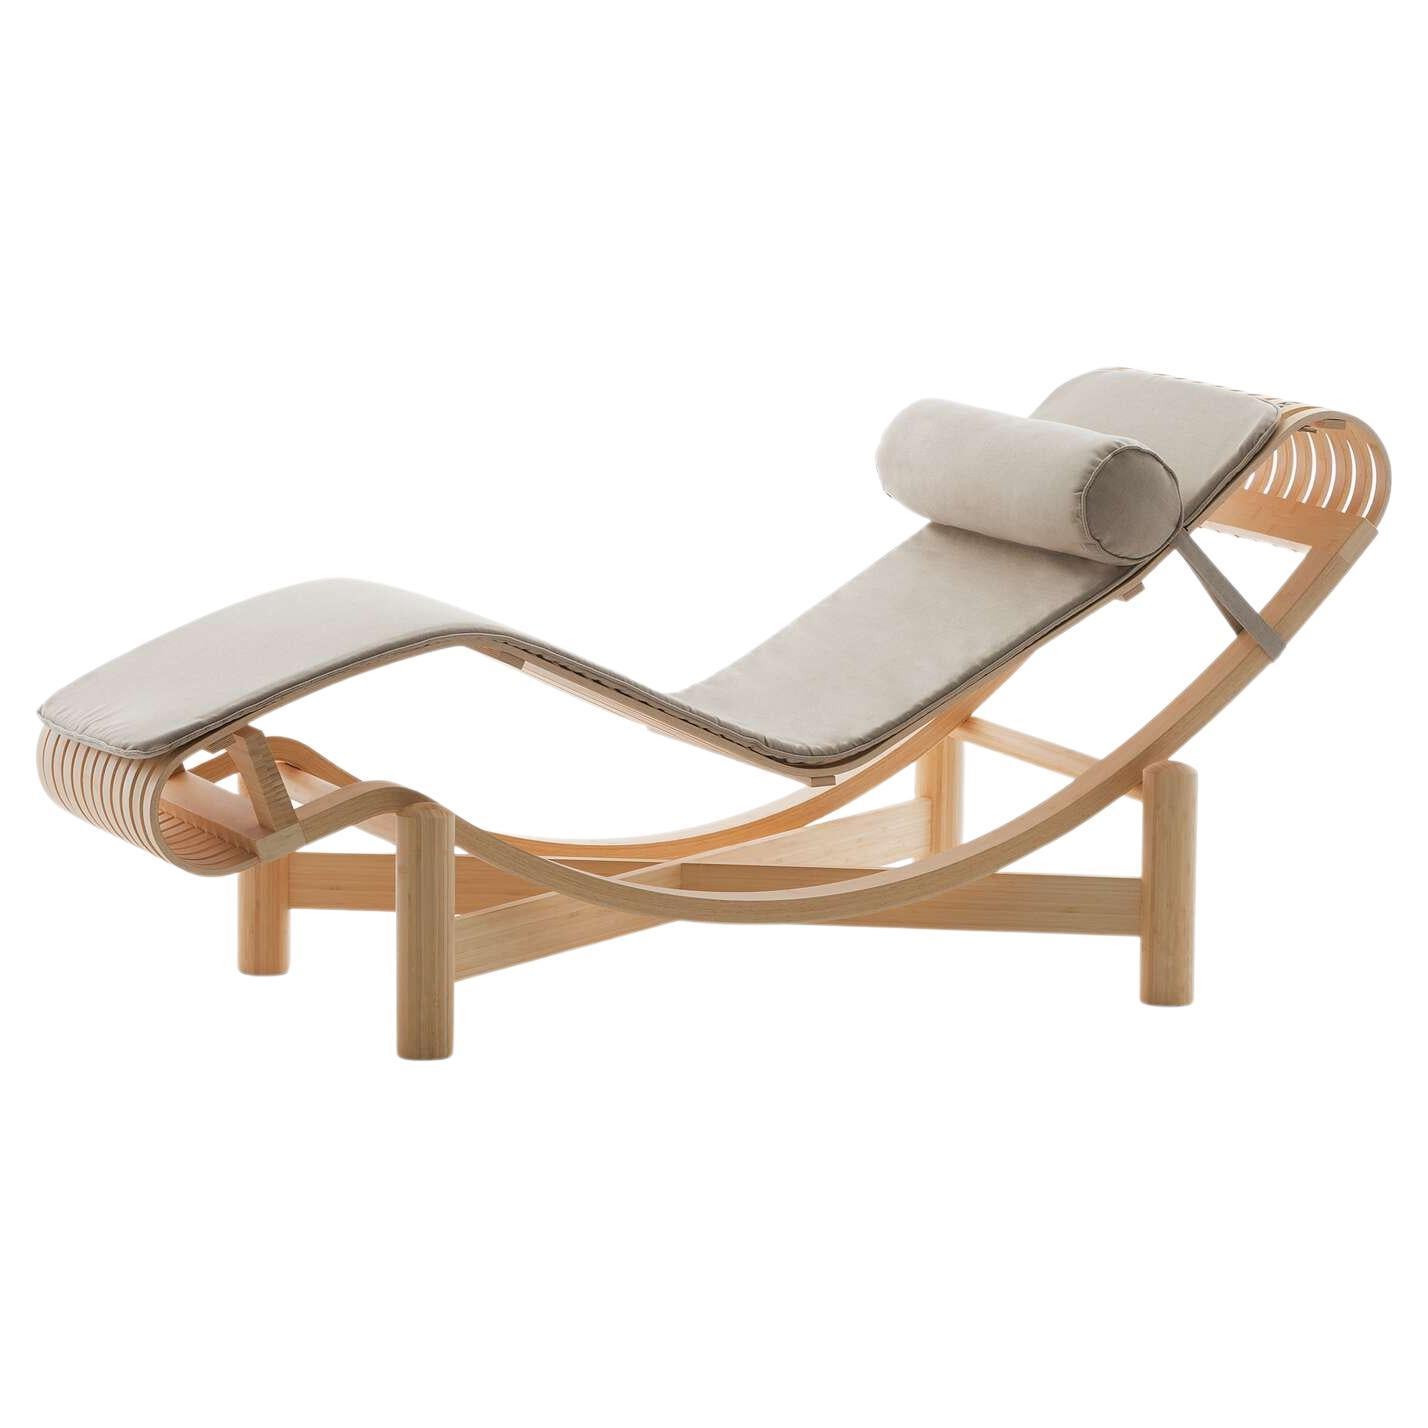 Charlotte Perriand Tokyo Chaise Longue for Cassina, Italy, new For Sale